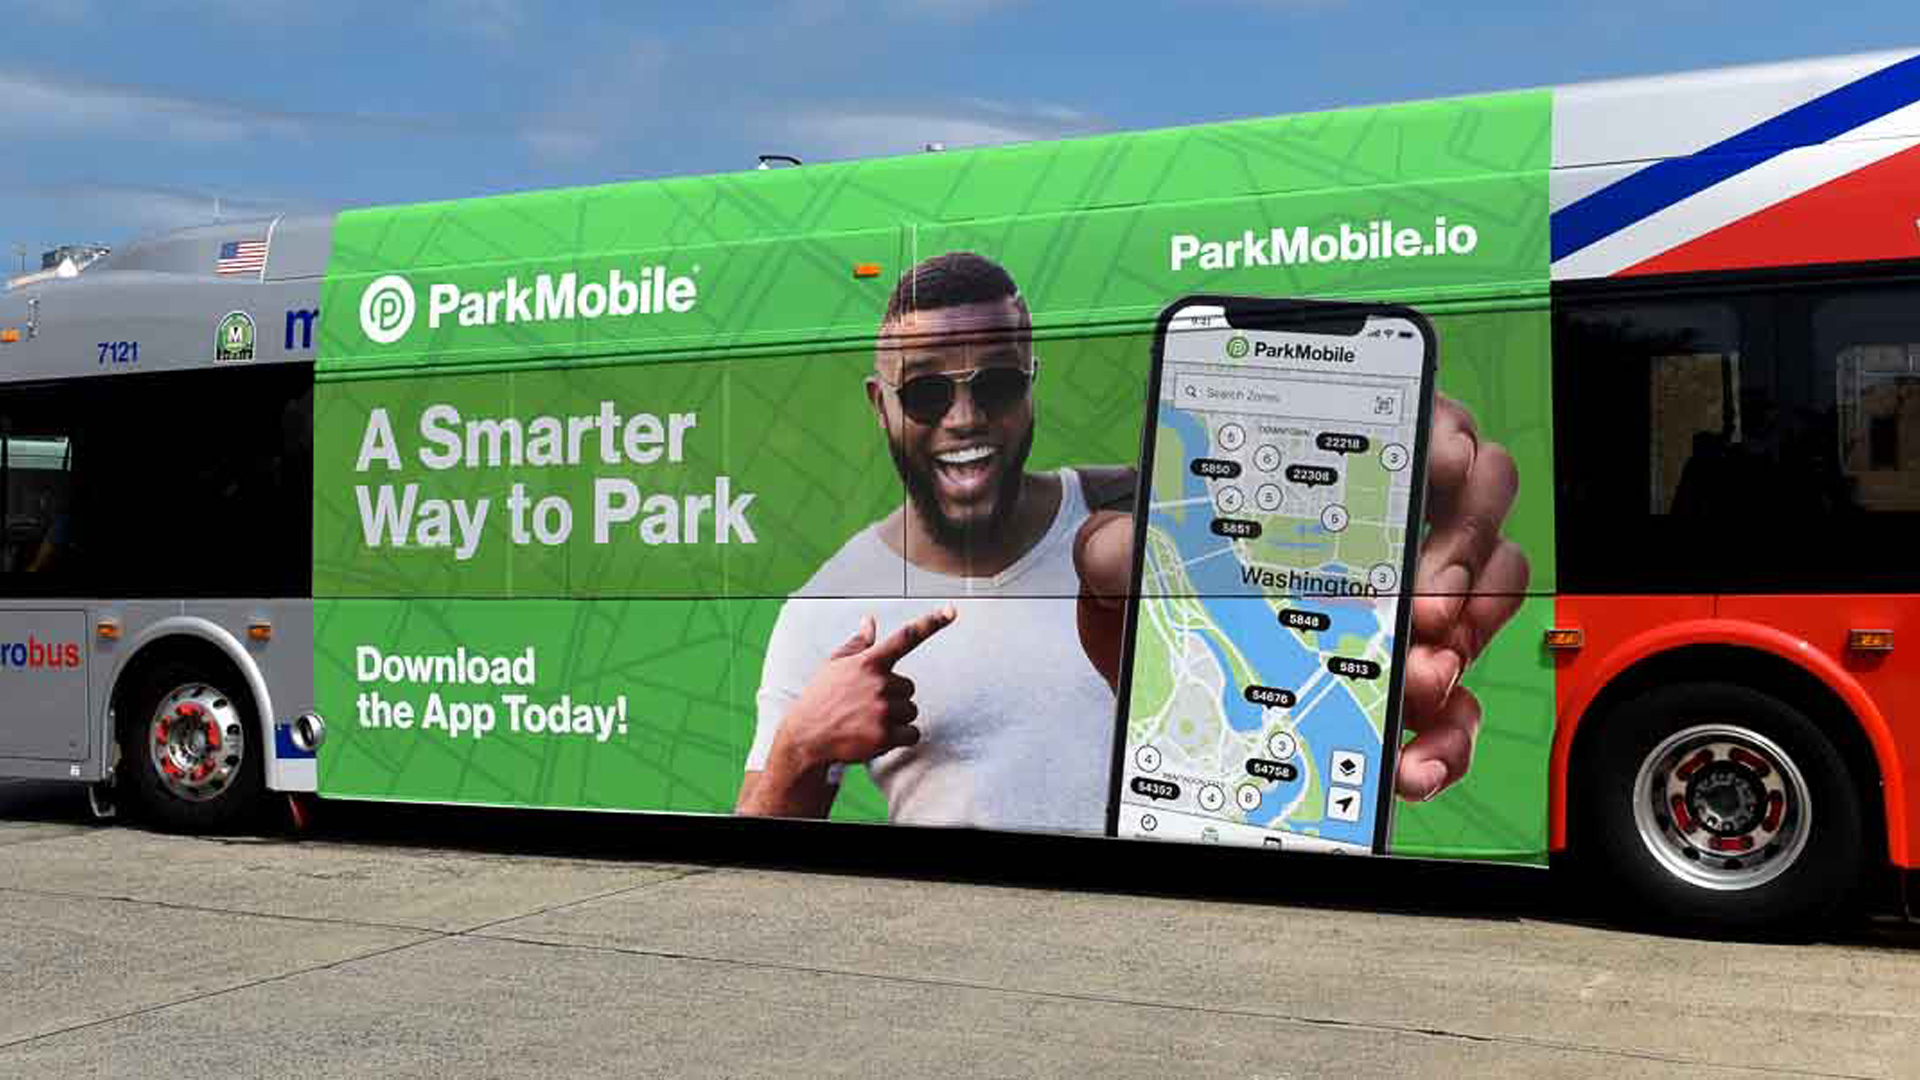 ParkMobile Billboards and Bus Ad Campaign created by Debi Gasper, The AD Agency